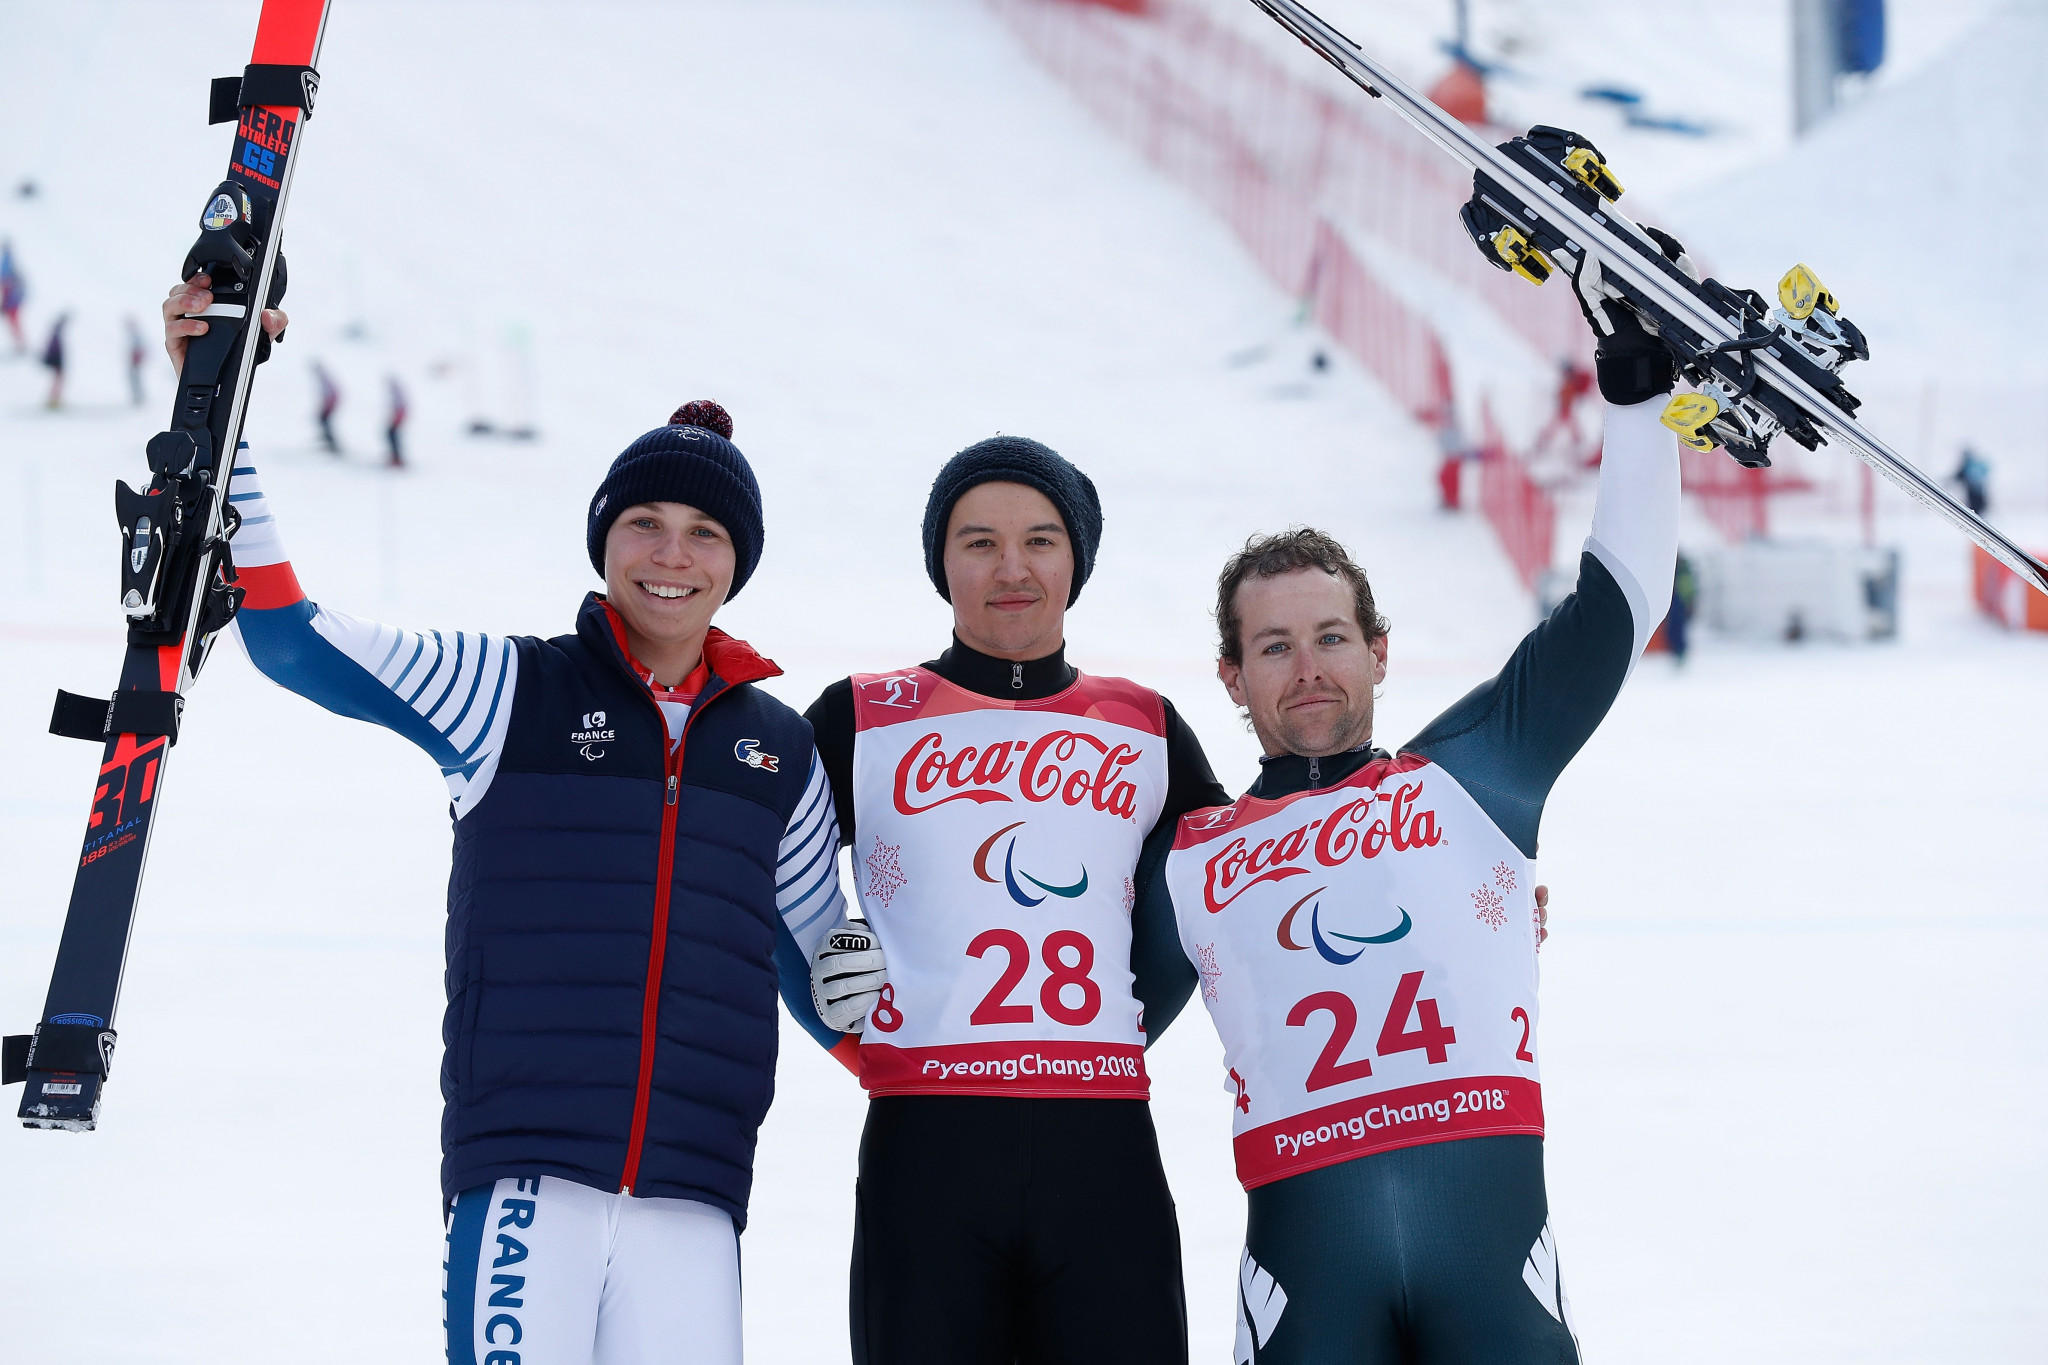 Neutral Paralympic Athlete Aleksei Bugaev, centre, retained his men's super combined standing title ©Getty Images